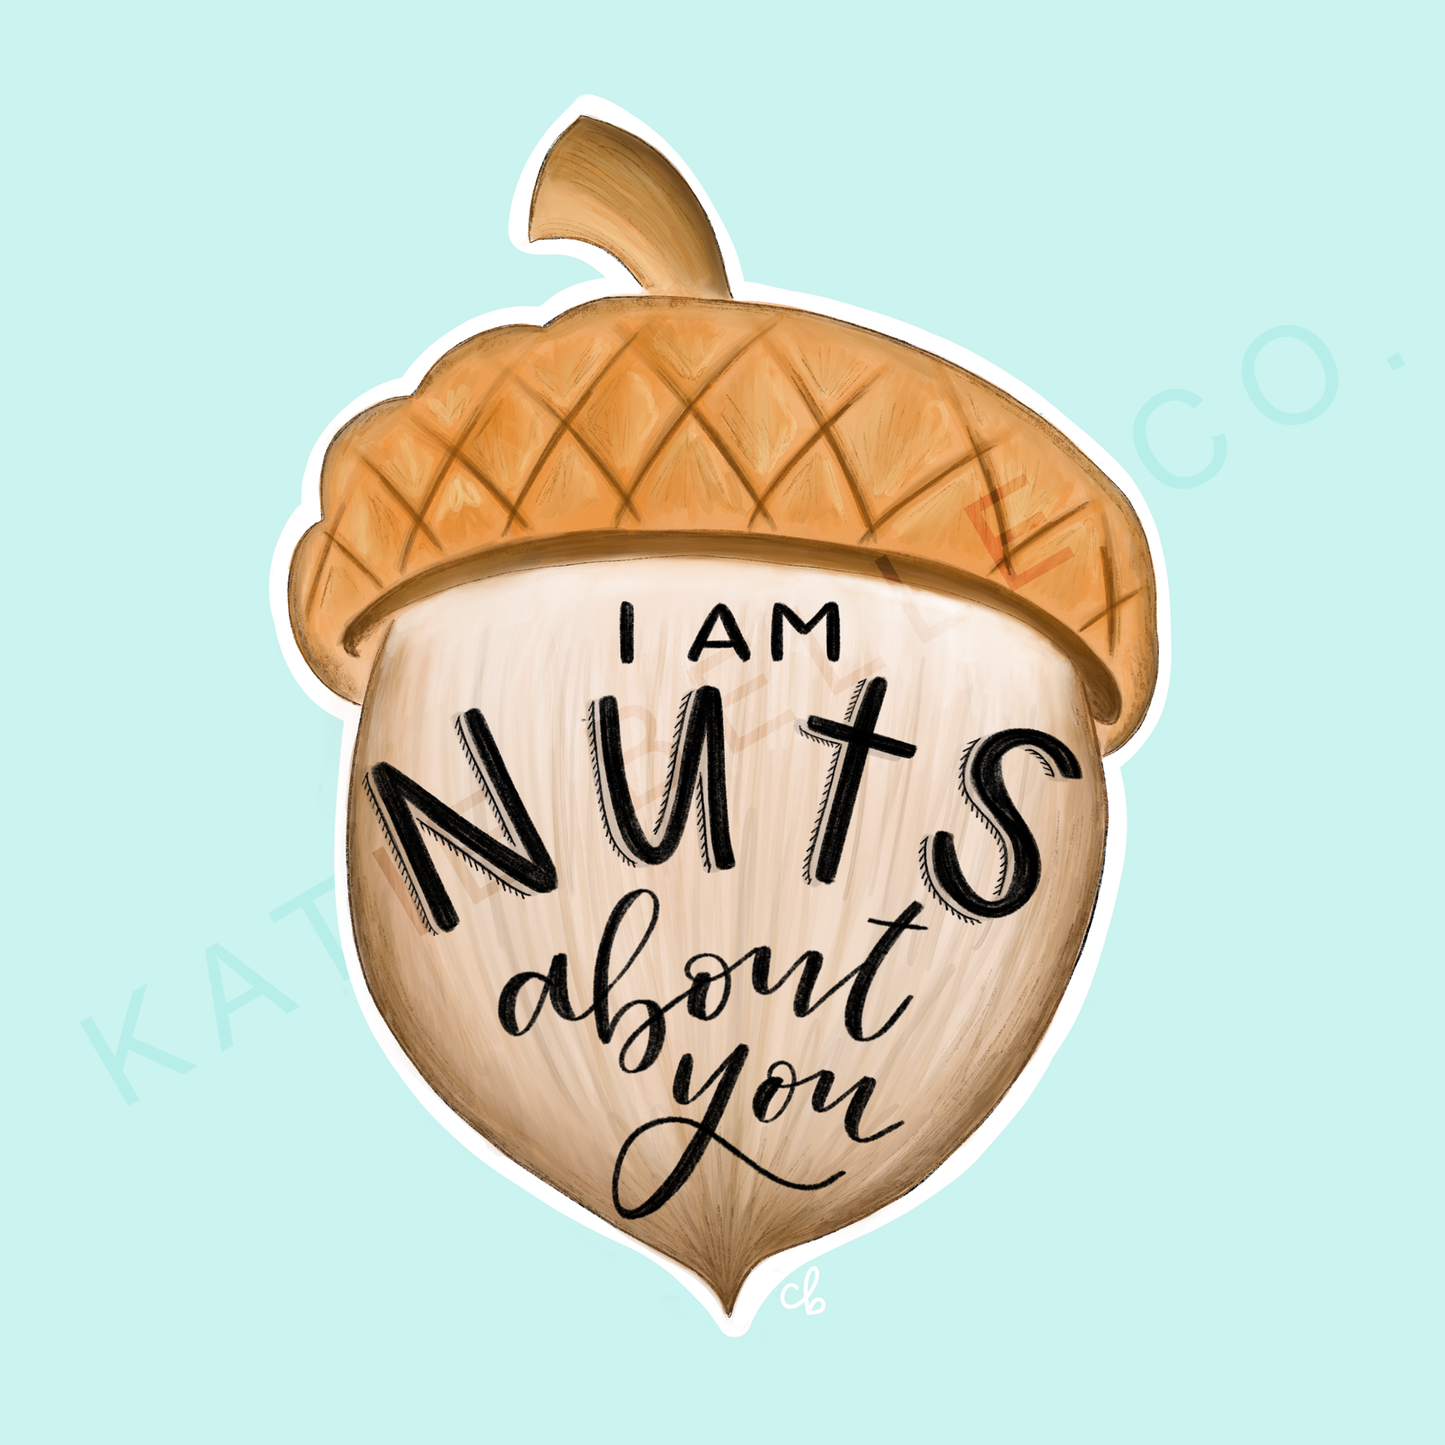 NUTS ABOUT YOU GREETING CARD - Old branding logo on back side